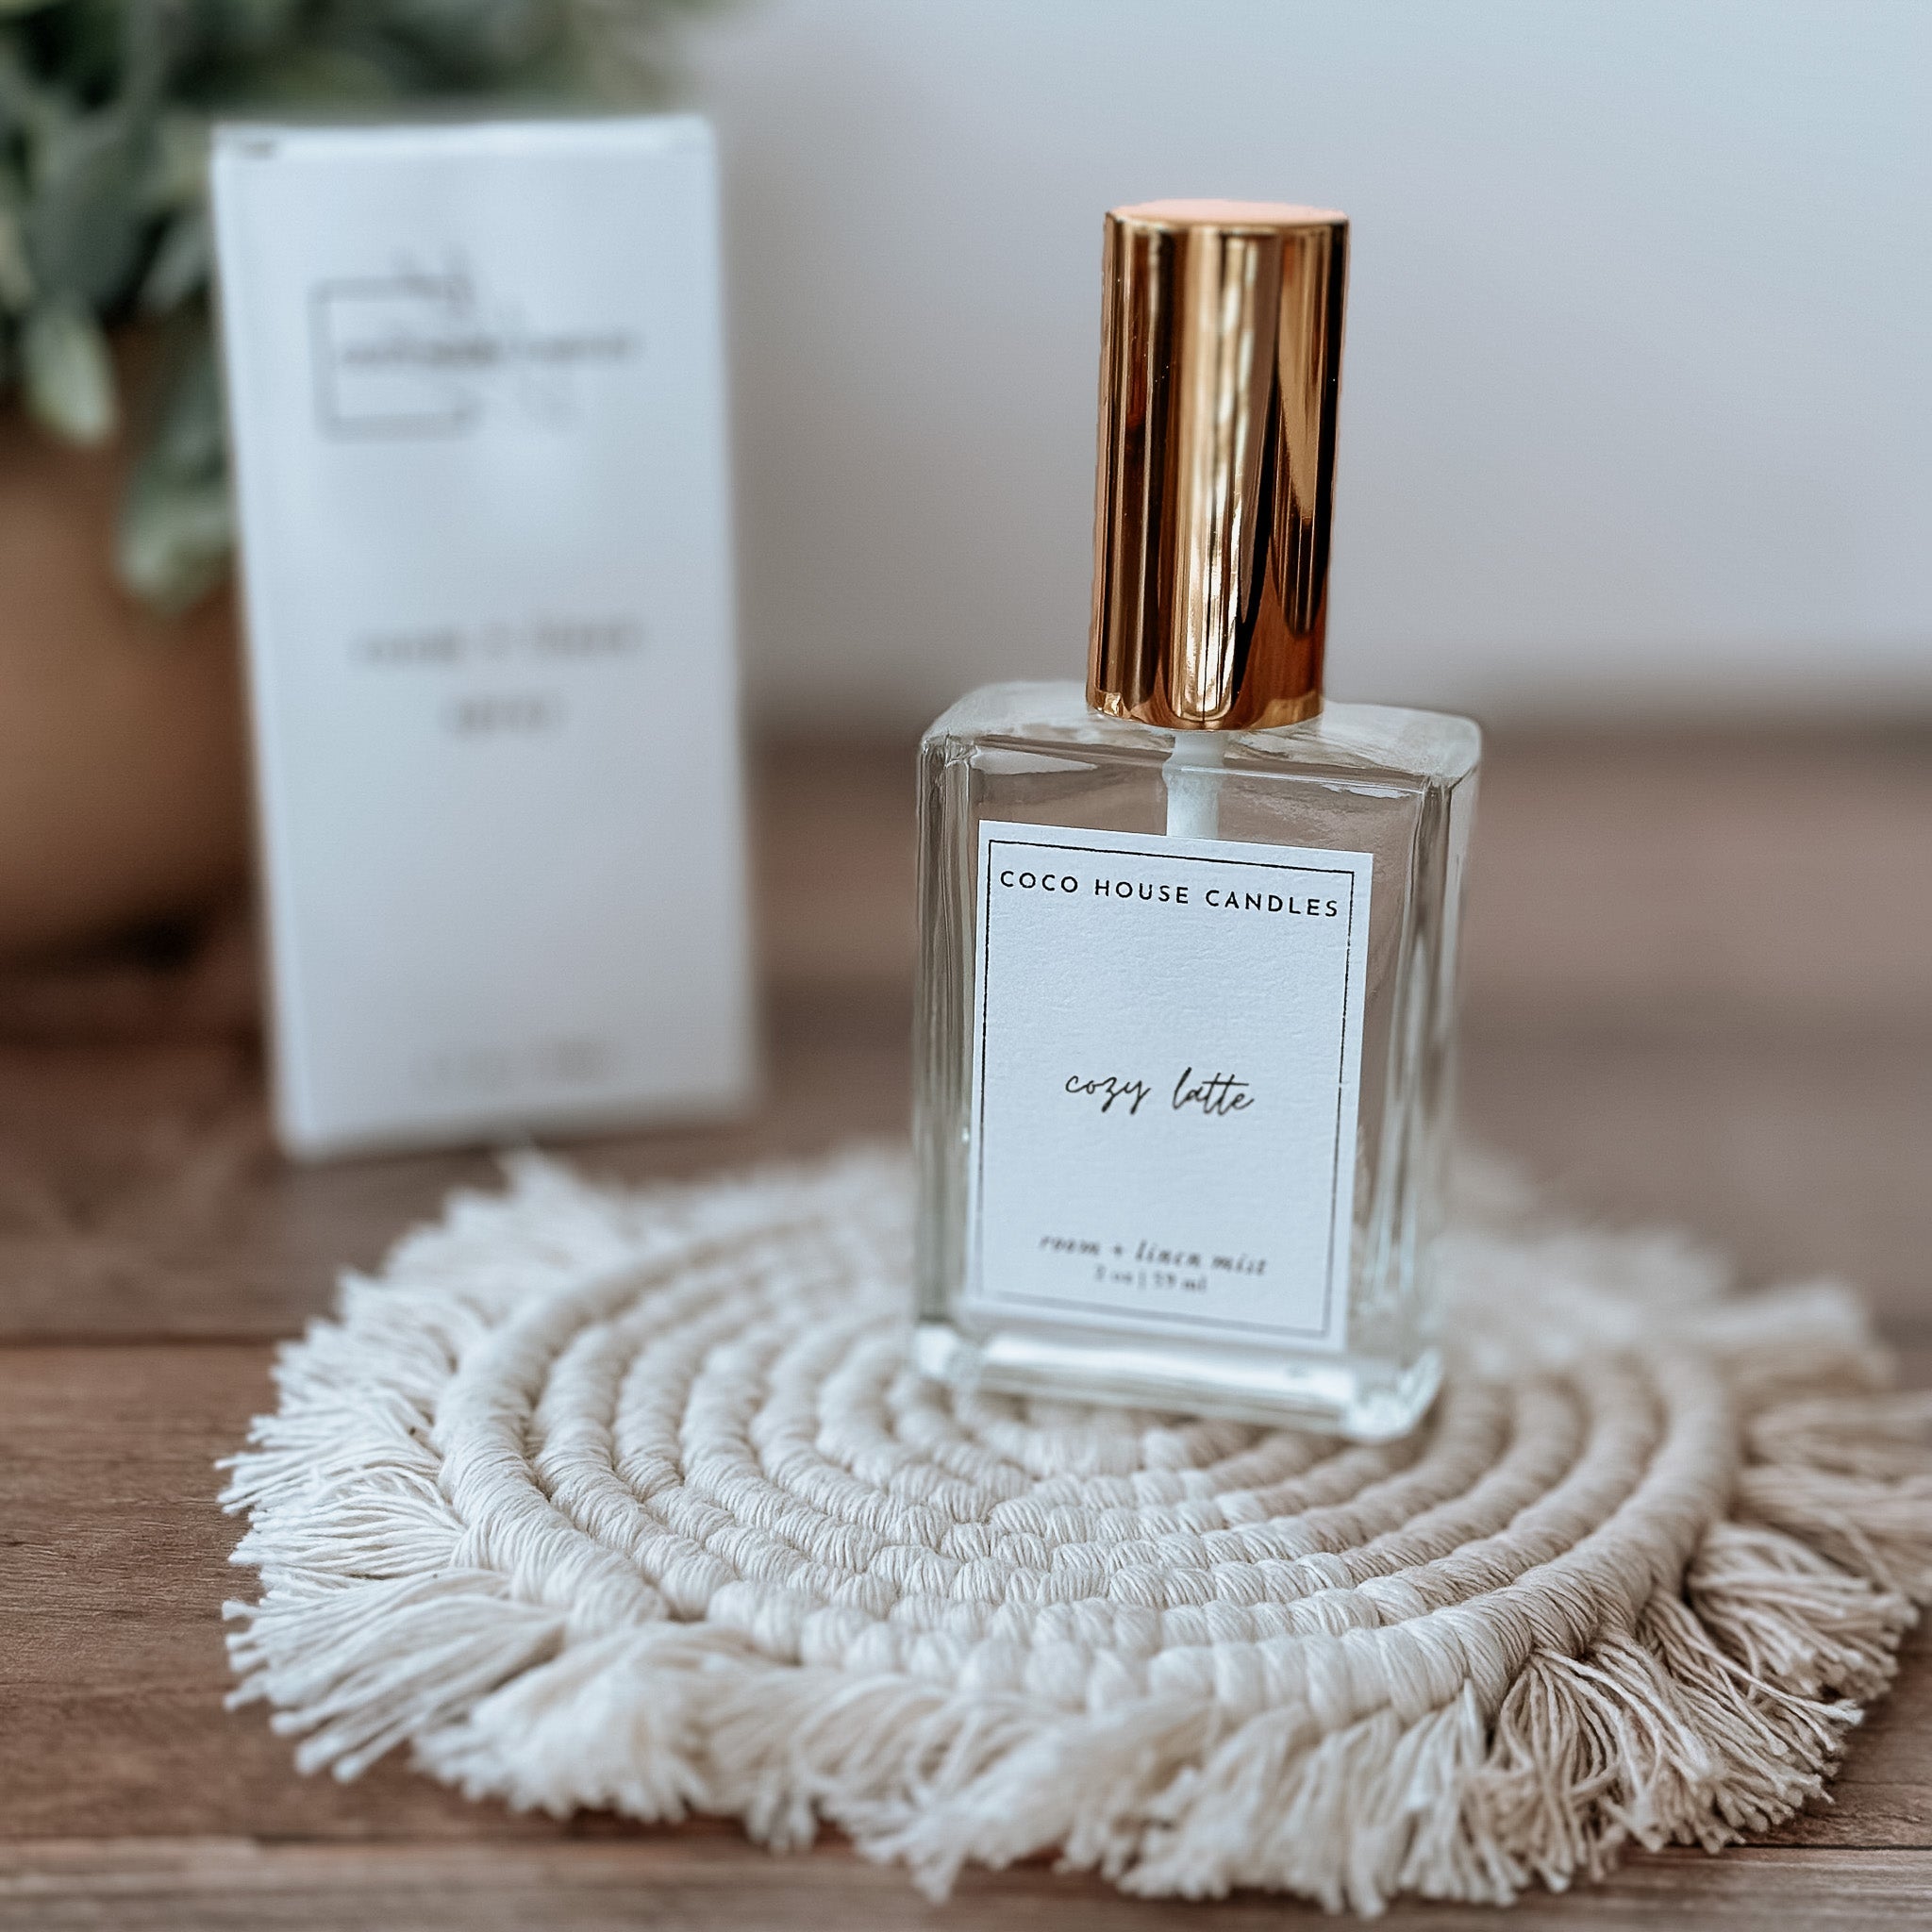 Fall Room + Linen Mists - Coco House Candles - Room + Linen Mist